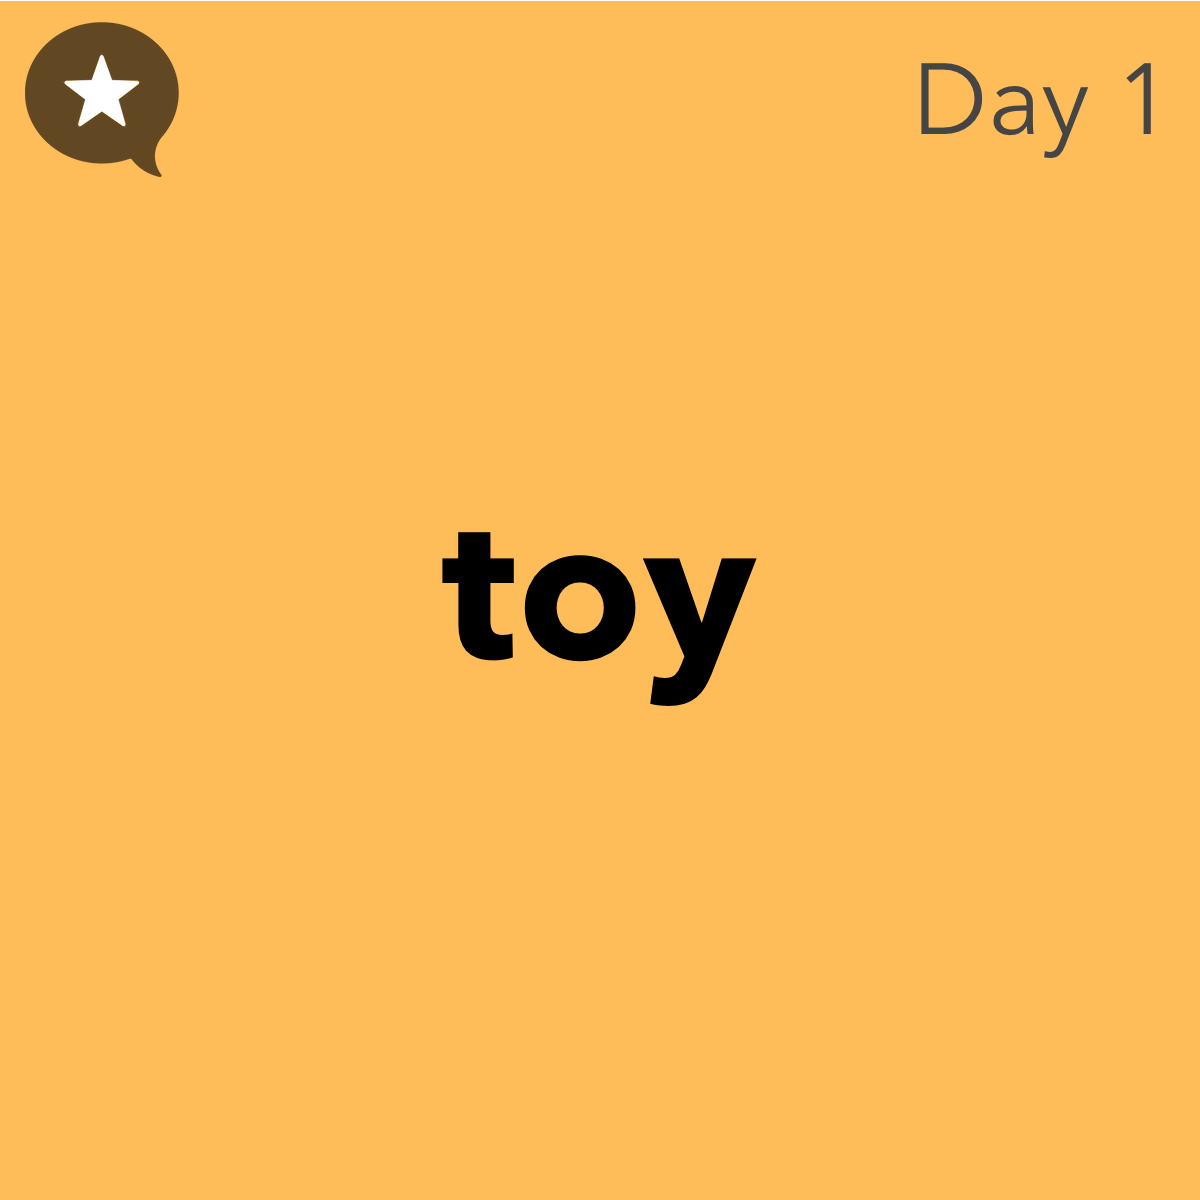 Day 1, Toy graphic